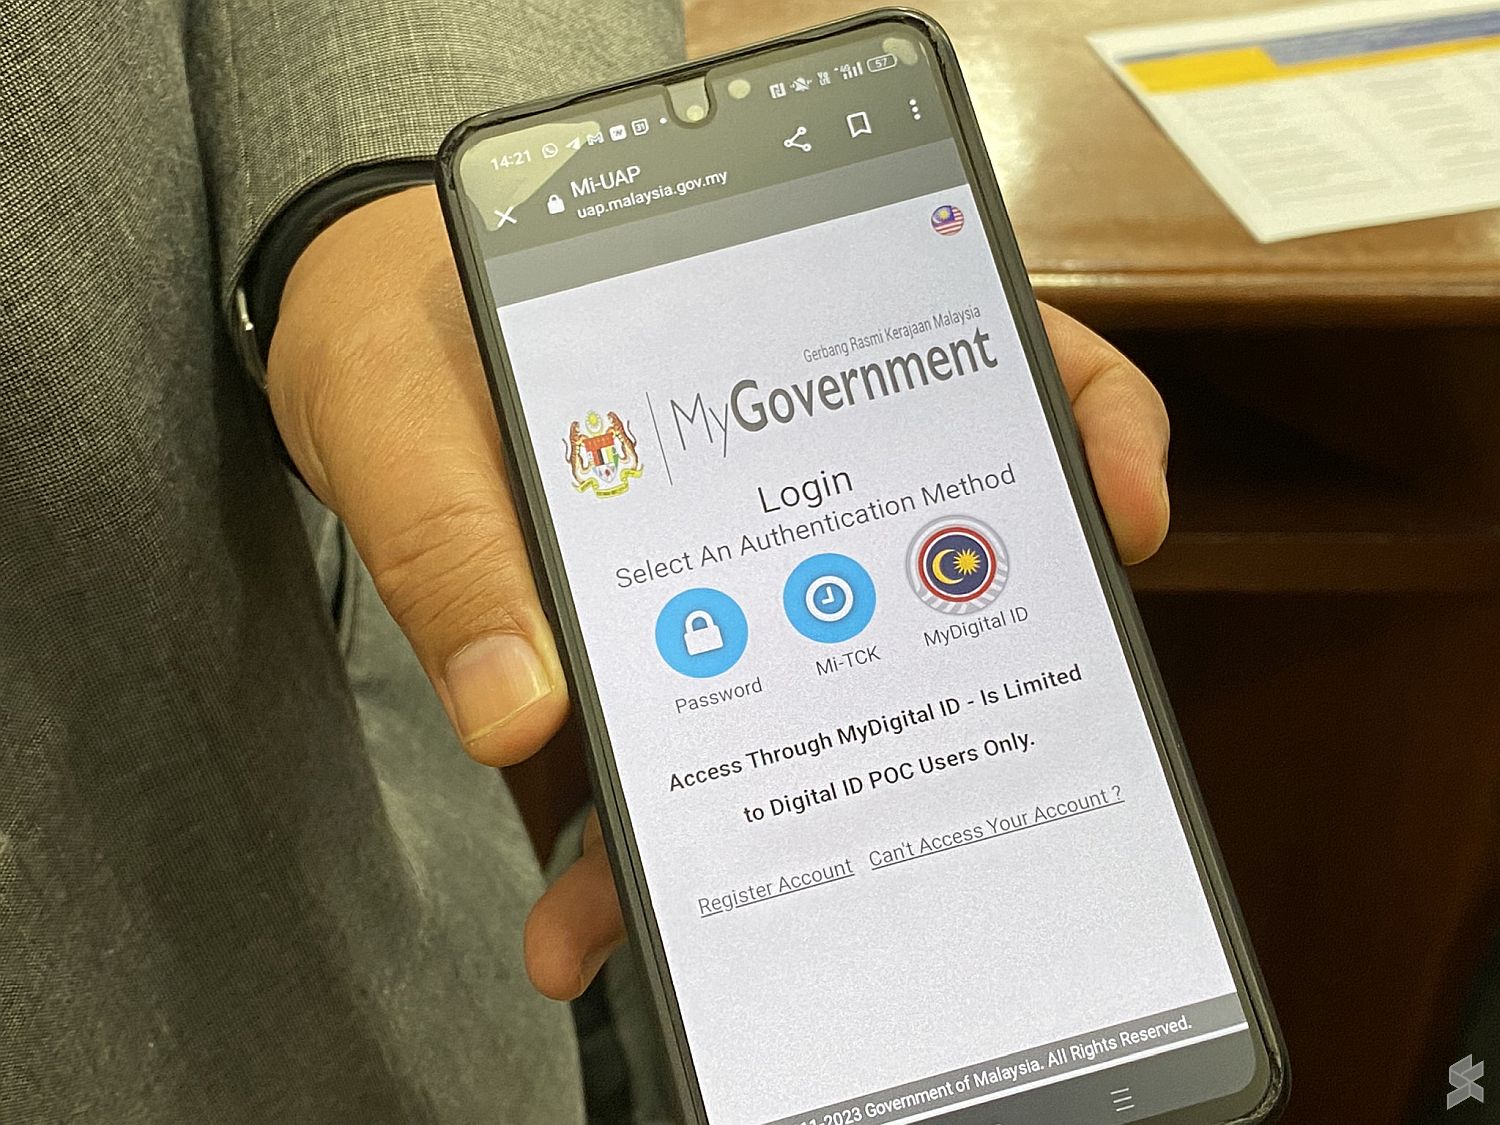 The MyDigital ID launch for the general public is only expected to take place in July 2024